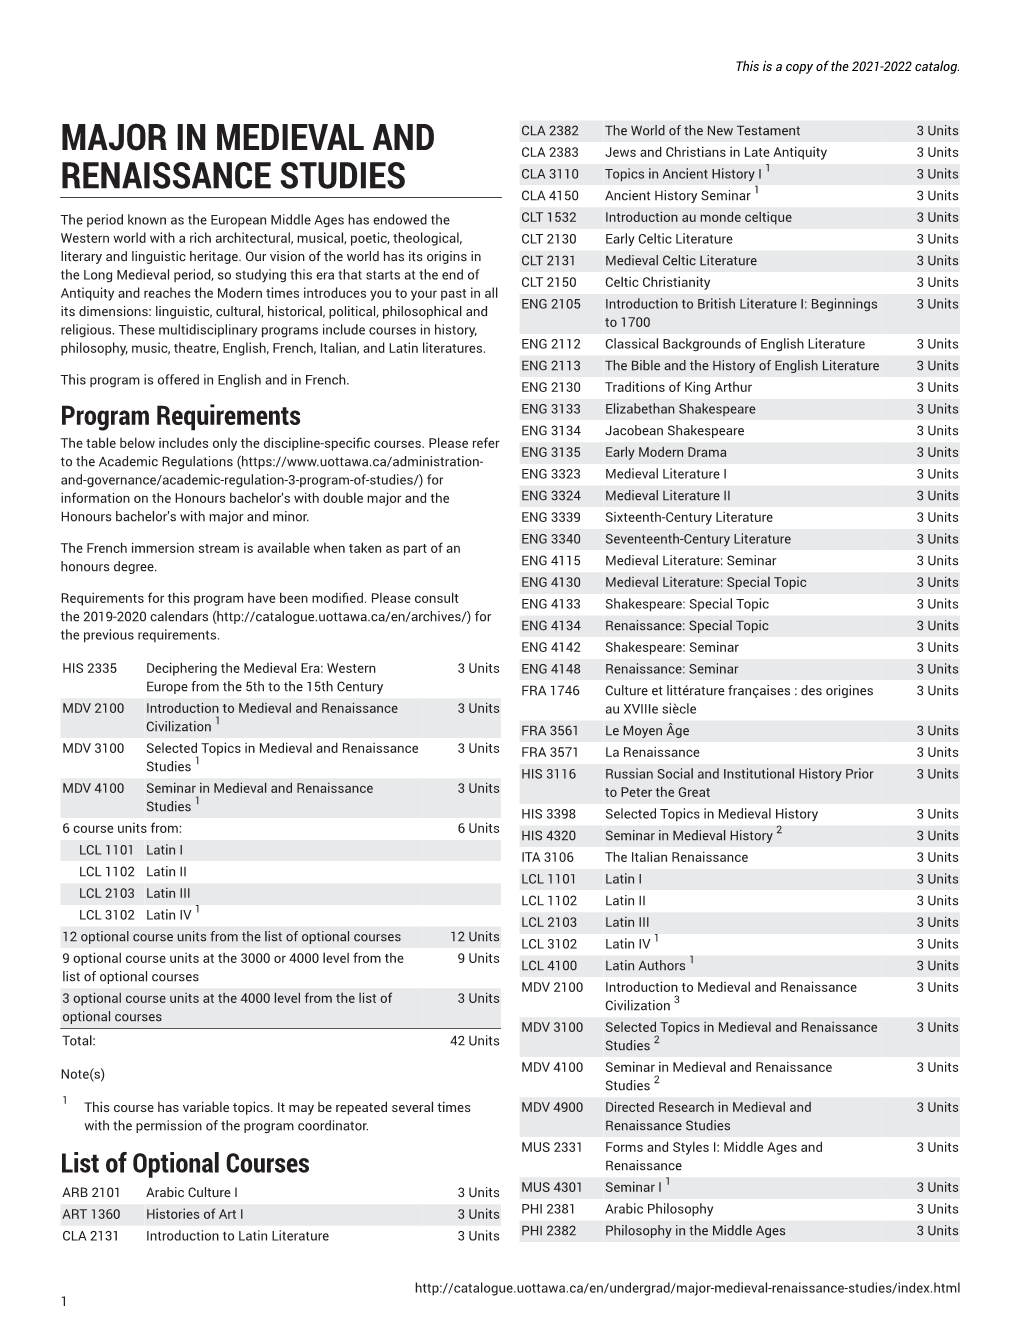 Major in Medieval and Renaissance Studies